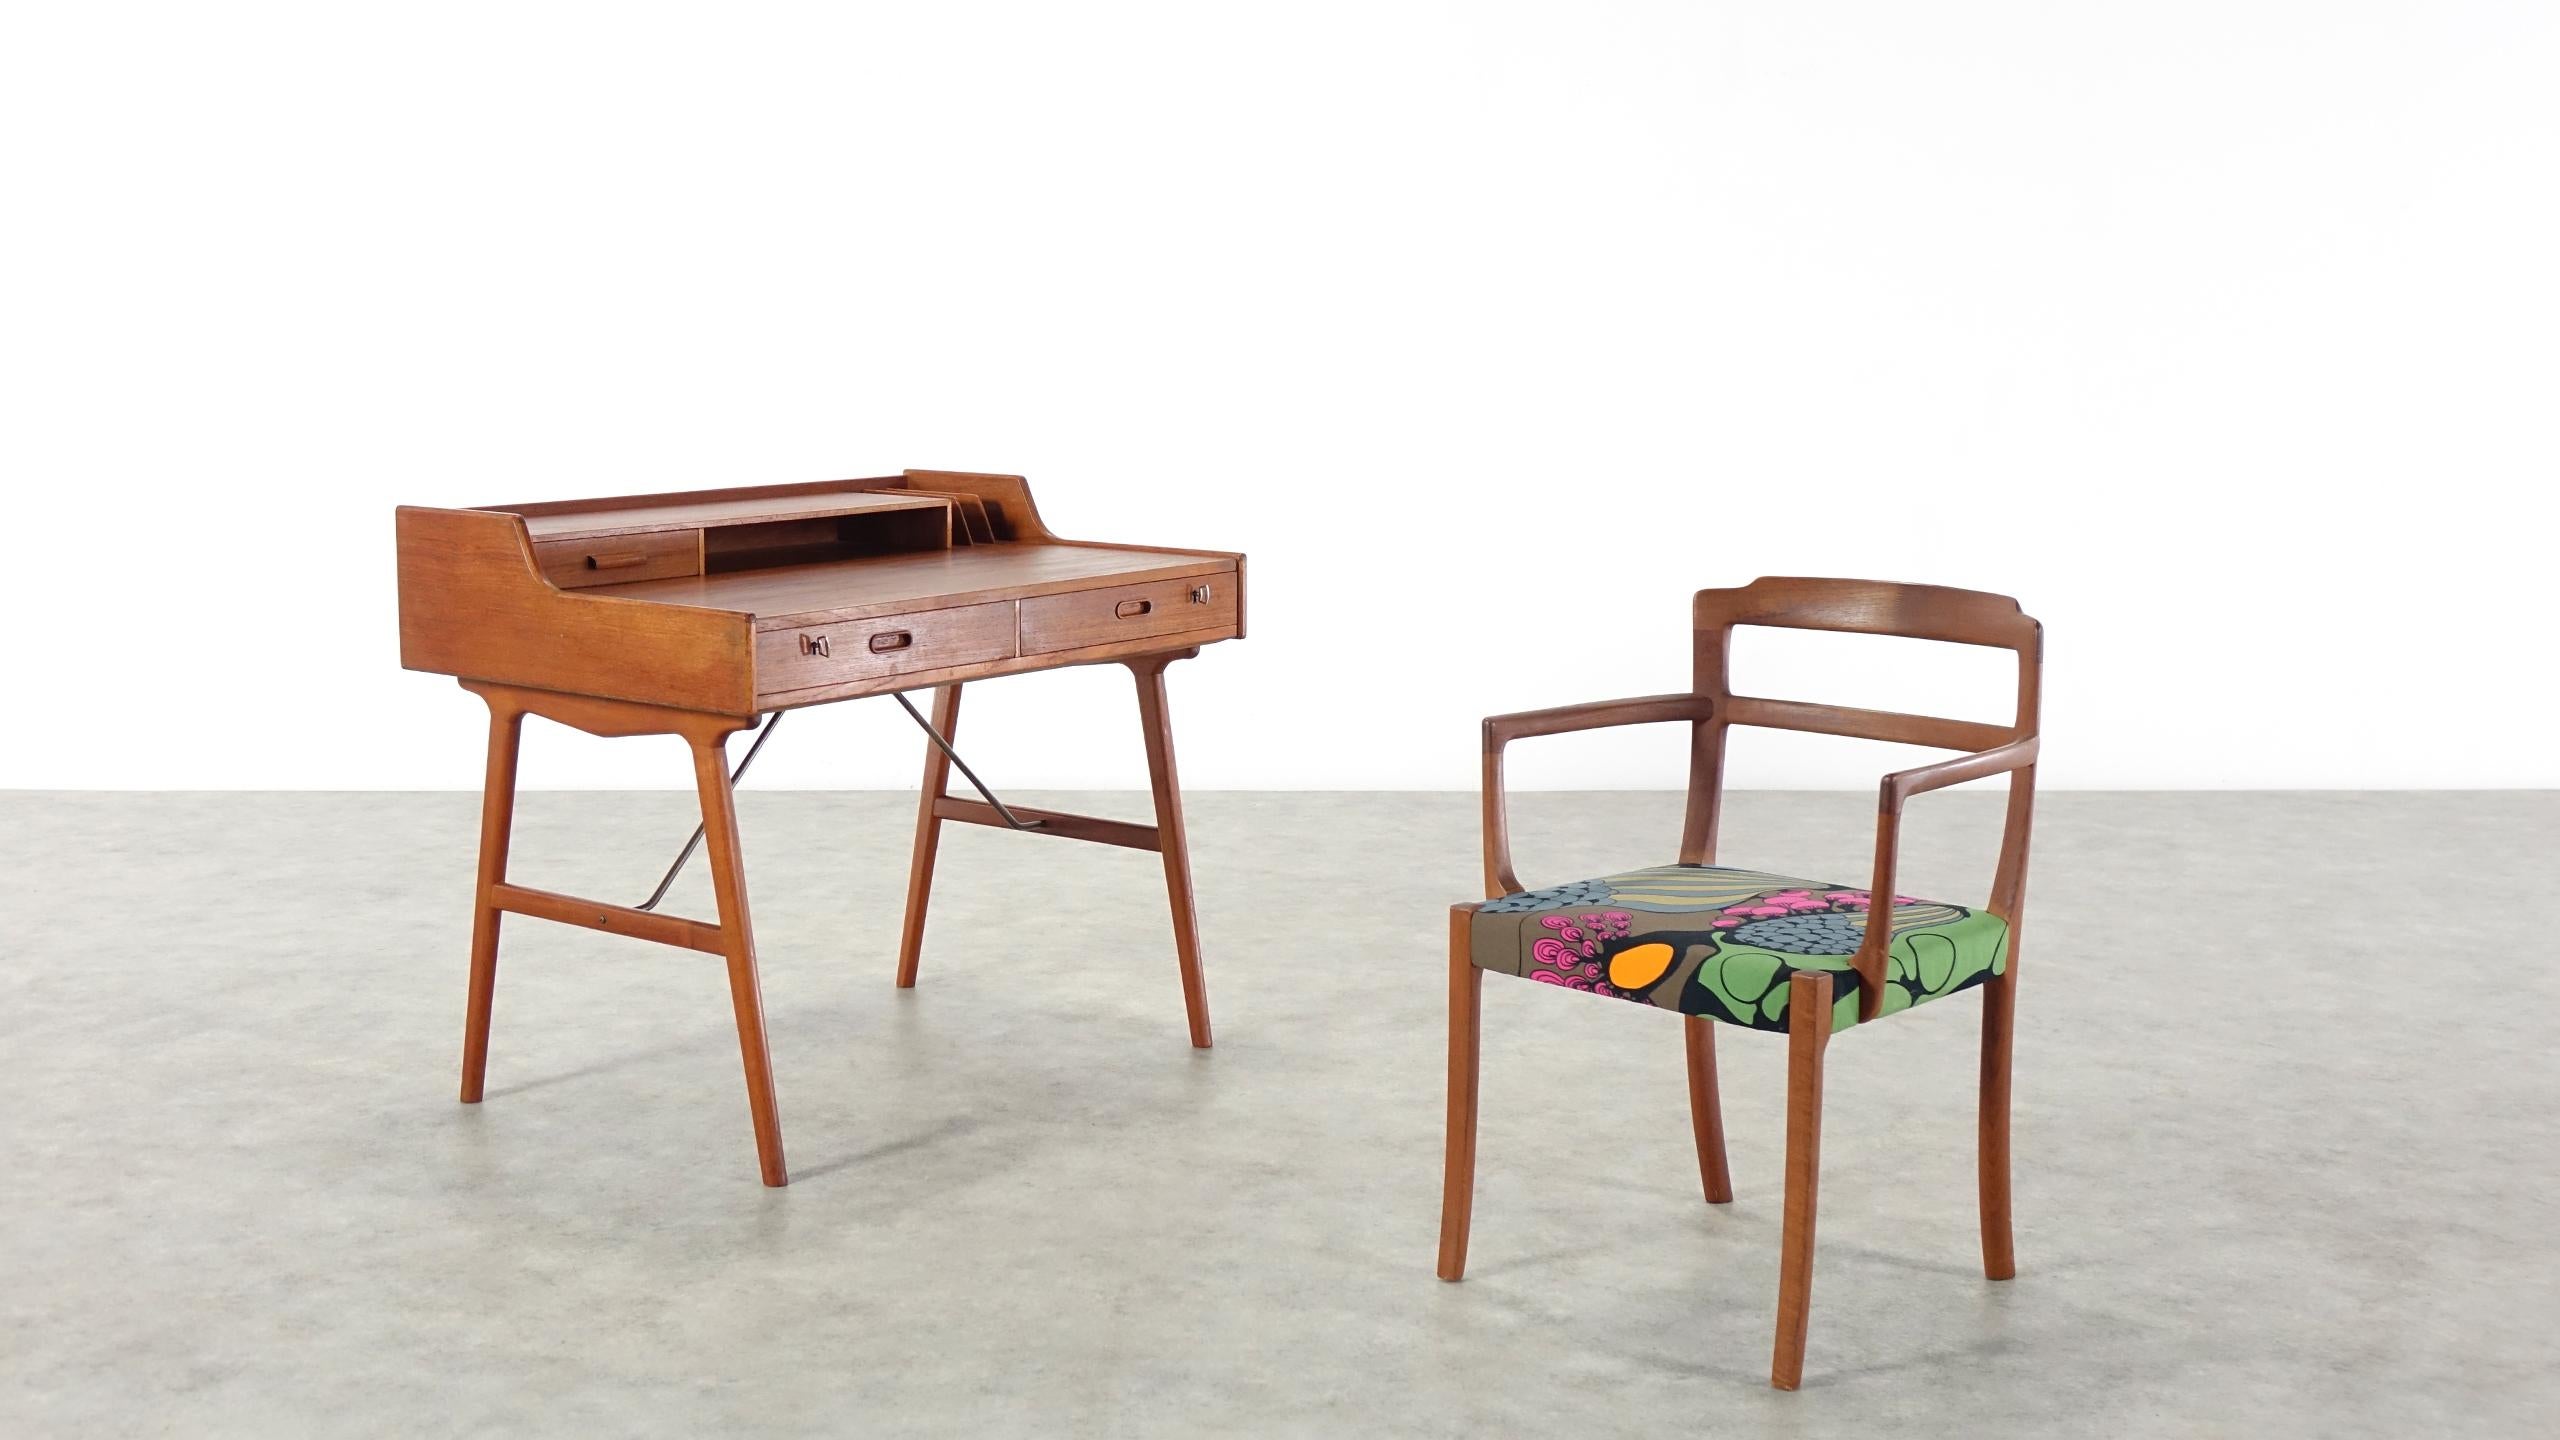 Wonderful Scandinavian writing desk designed by Arne Wahl Iversen in 1961, model 56 for Vinde Møbelfabrik with spraying legs, table top with drawer, storage shelf and folder, marked Danish design and manufacturers stamp on the underside. All